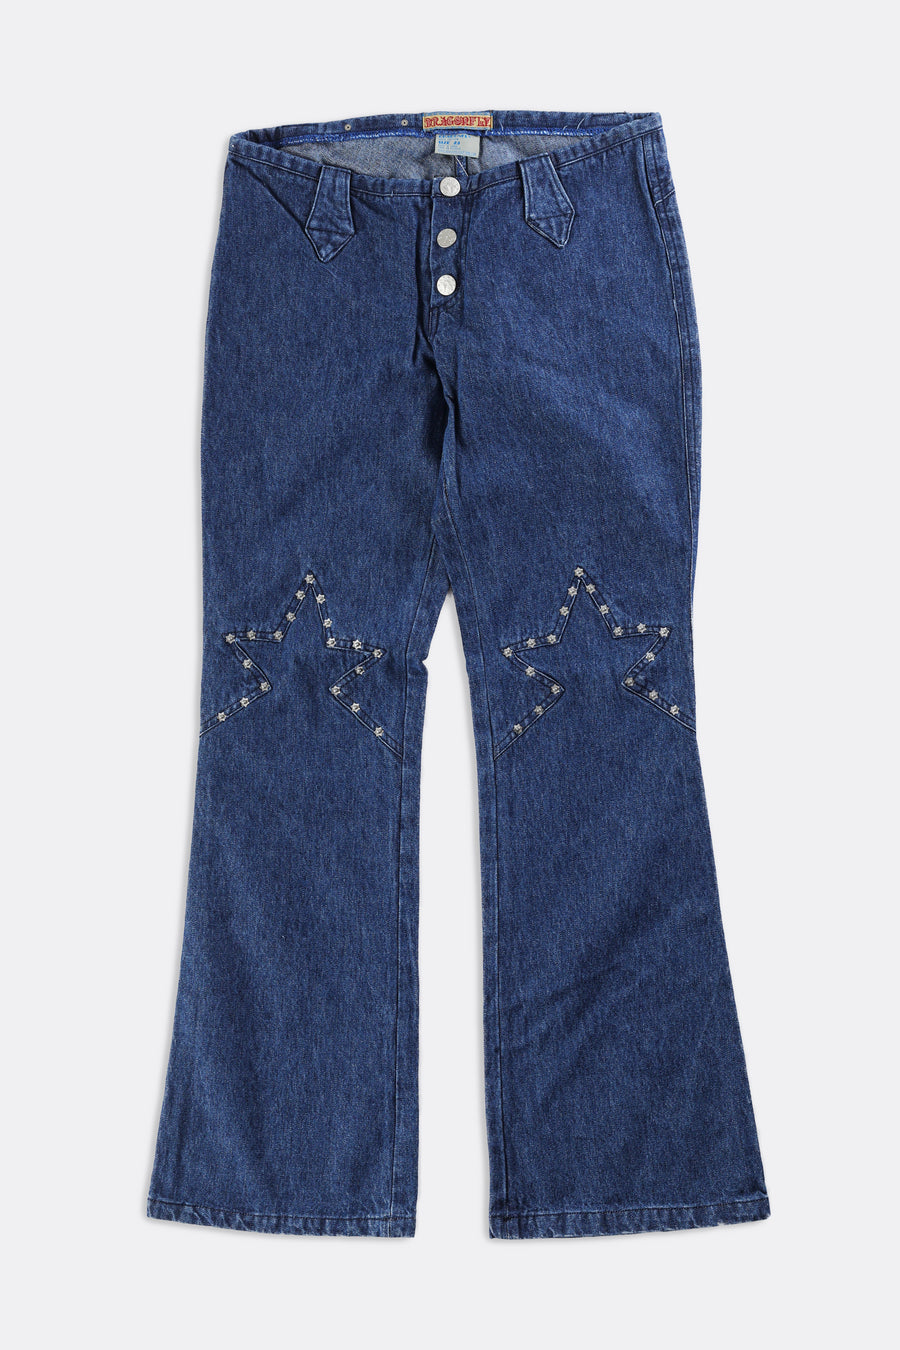 Deadstock Dragonfly Star Low Rise Jeans